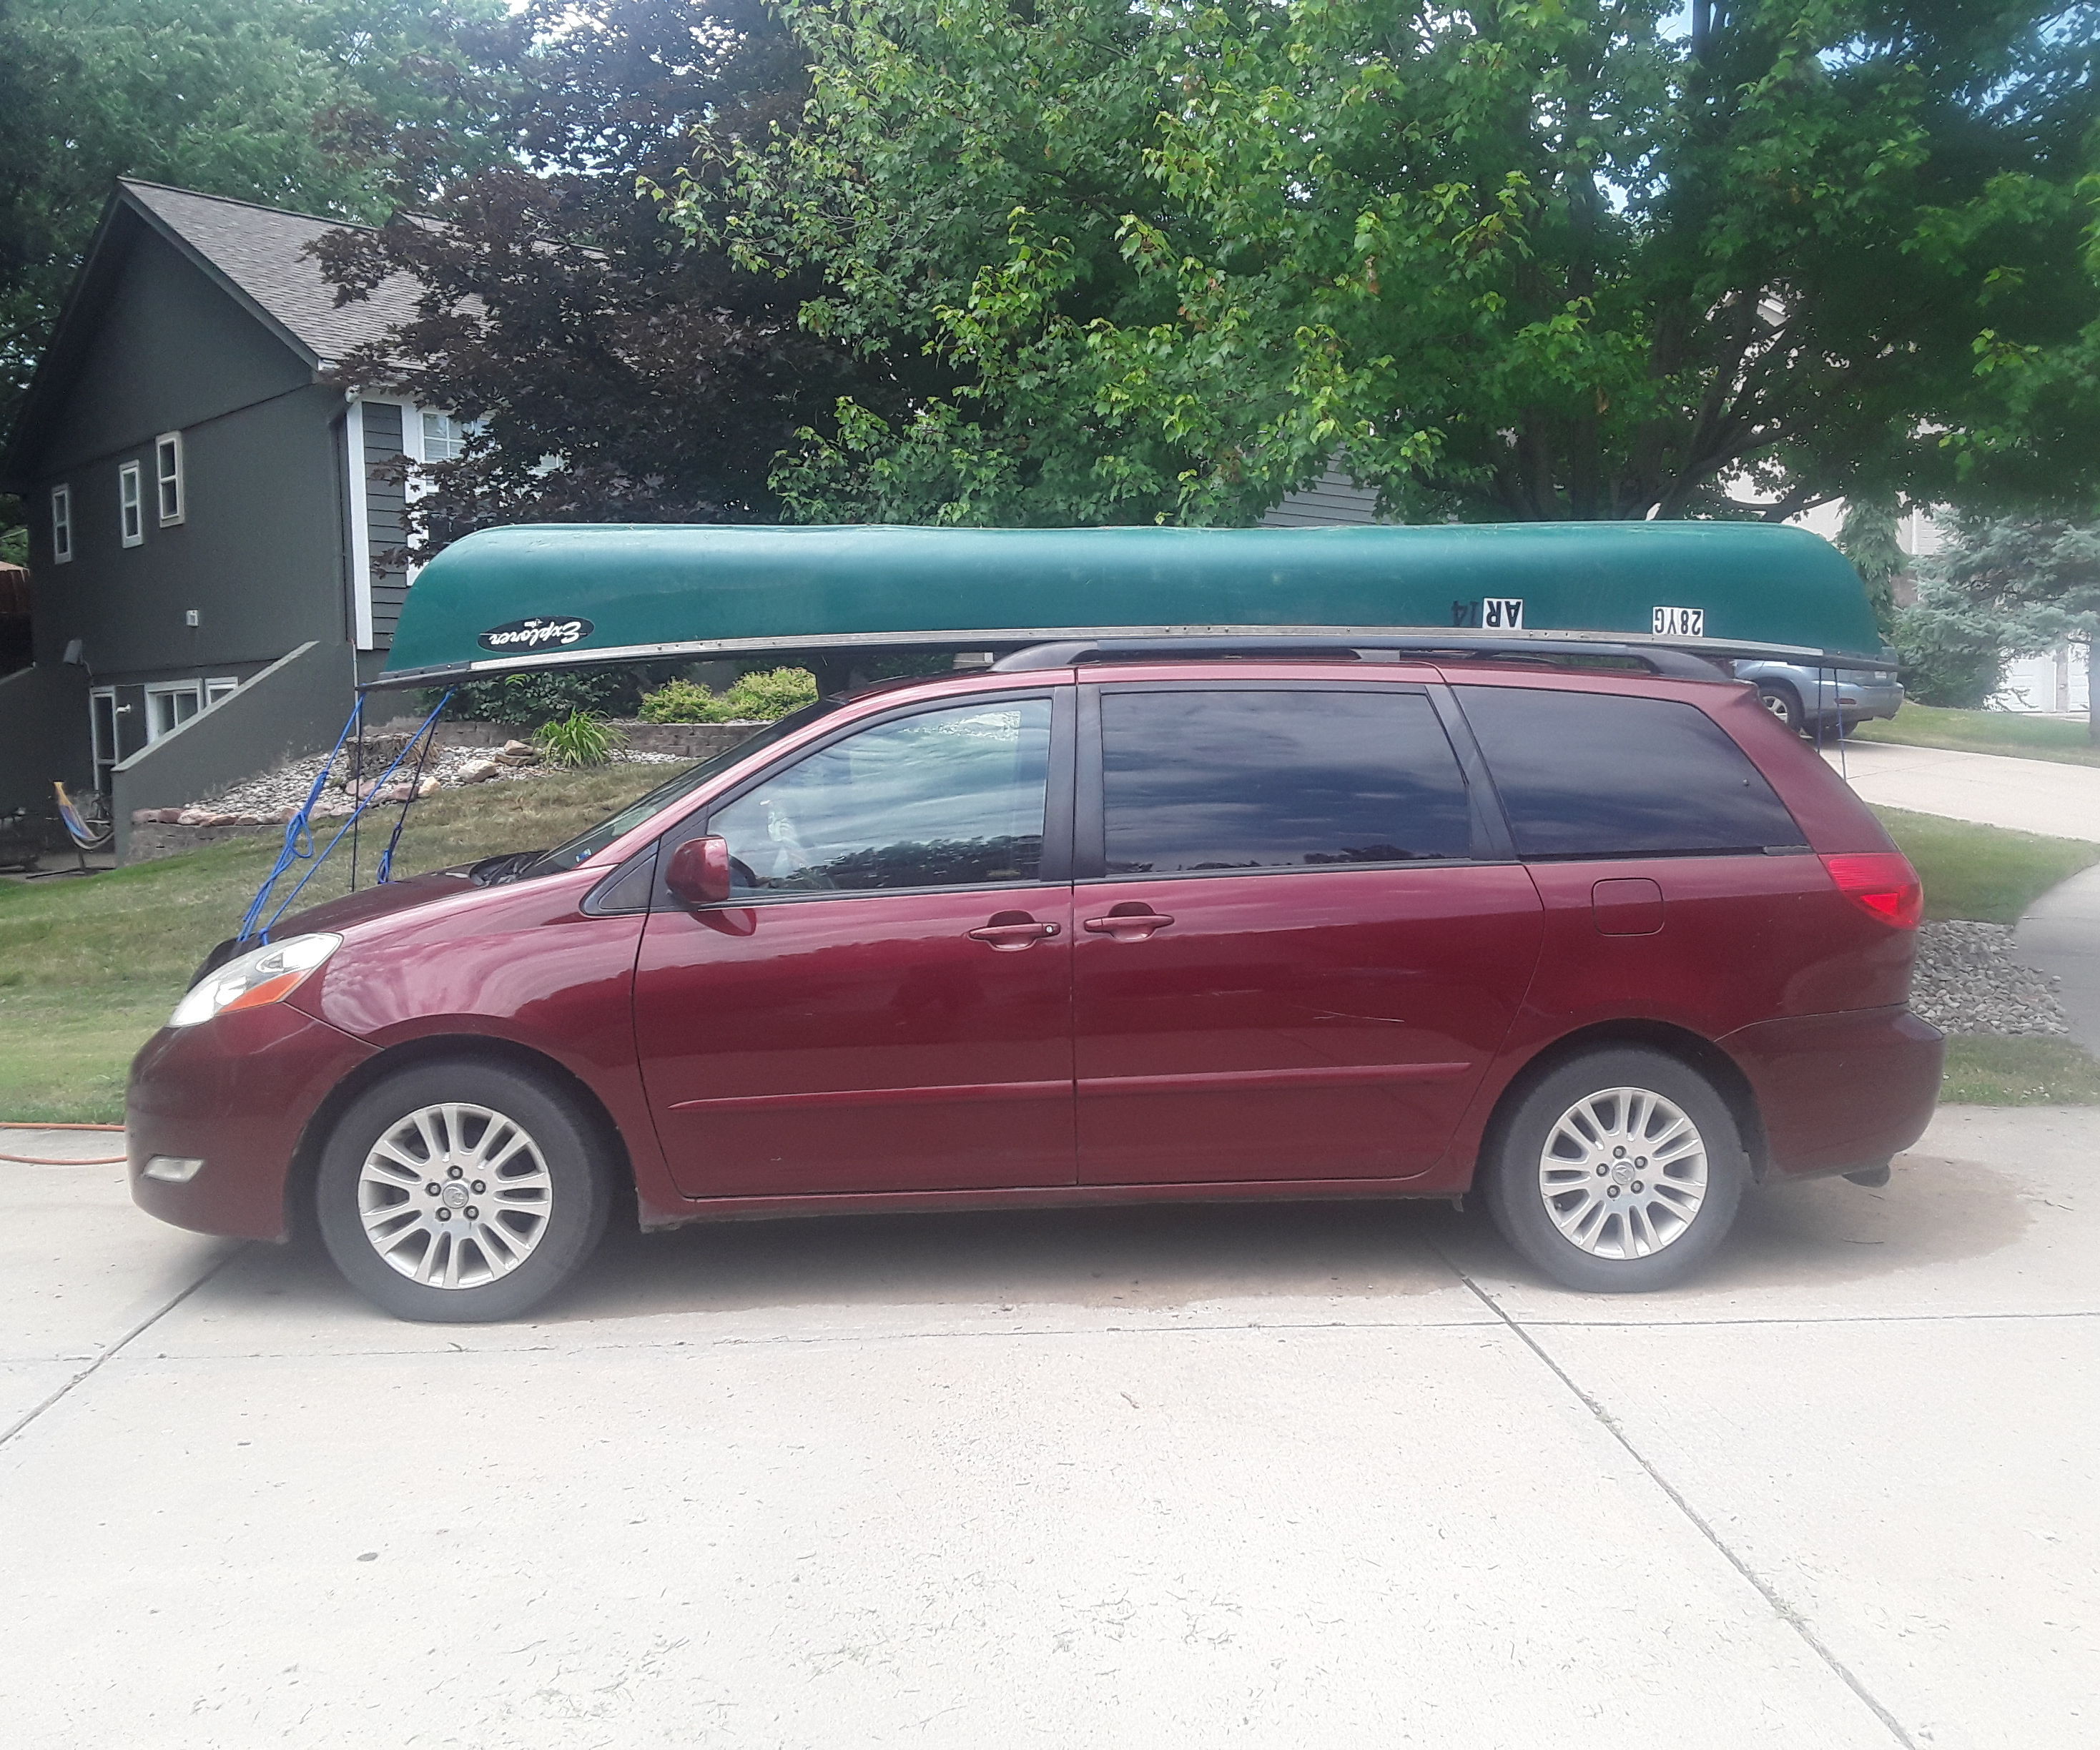 How to Tie a Canoe to Your Vehicle for Safe Traveling